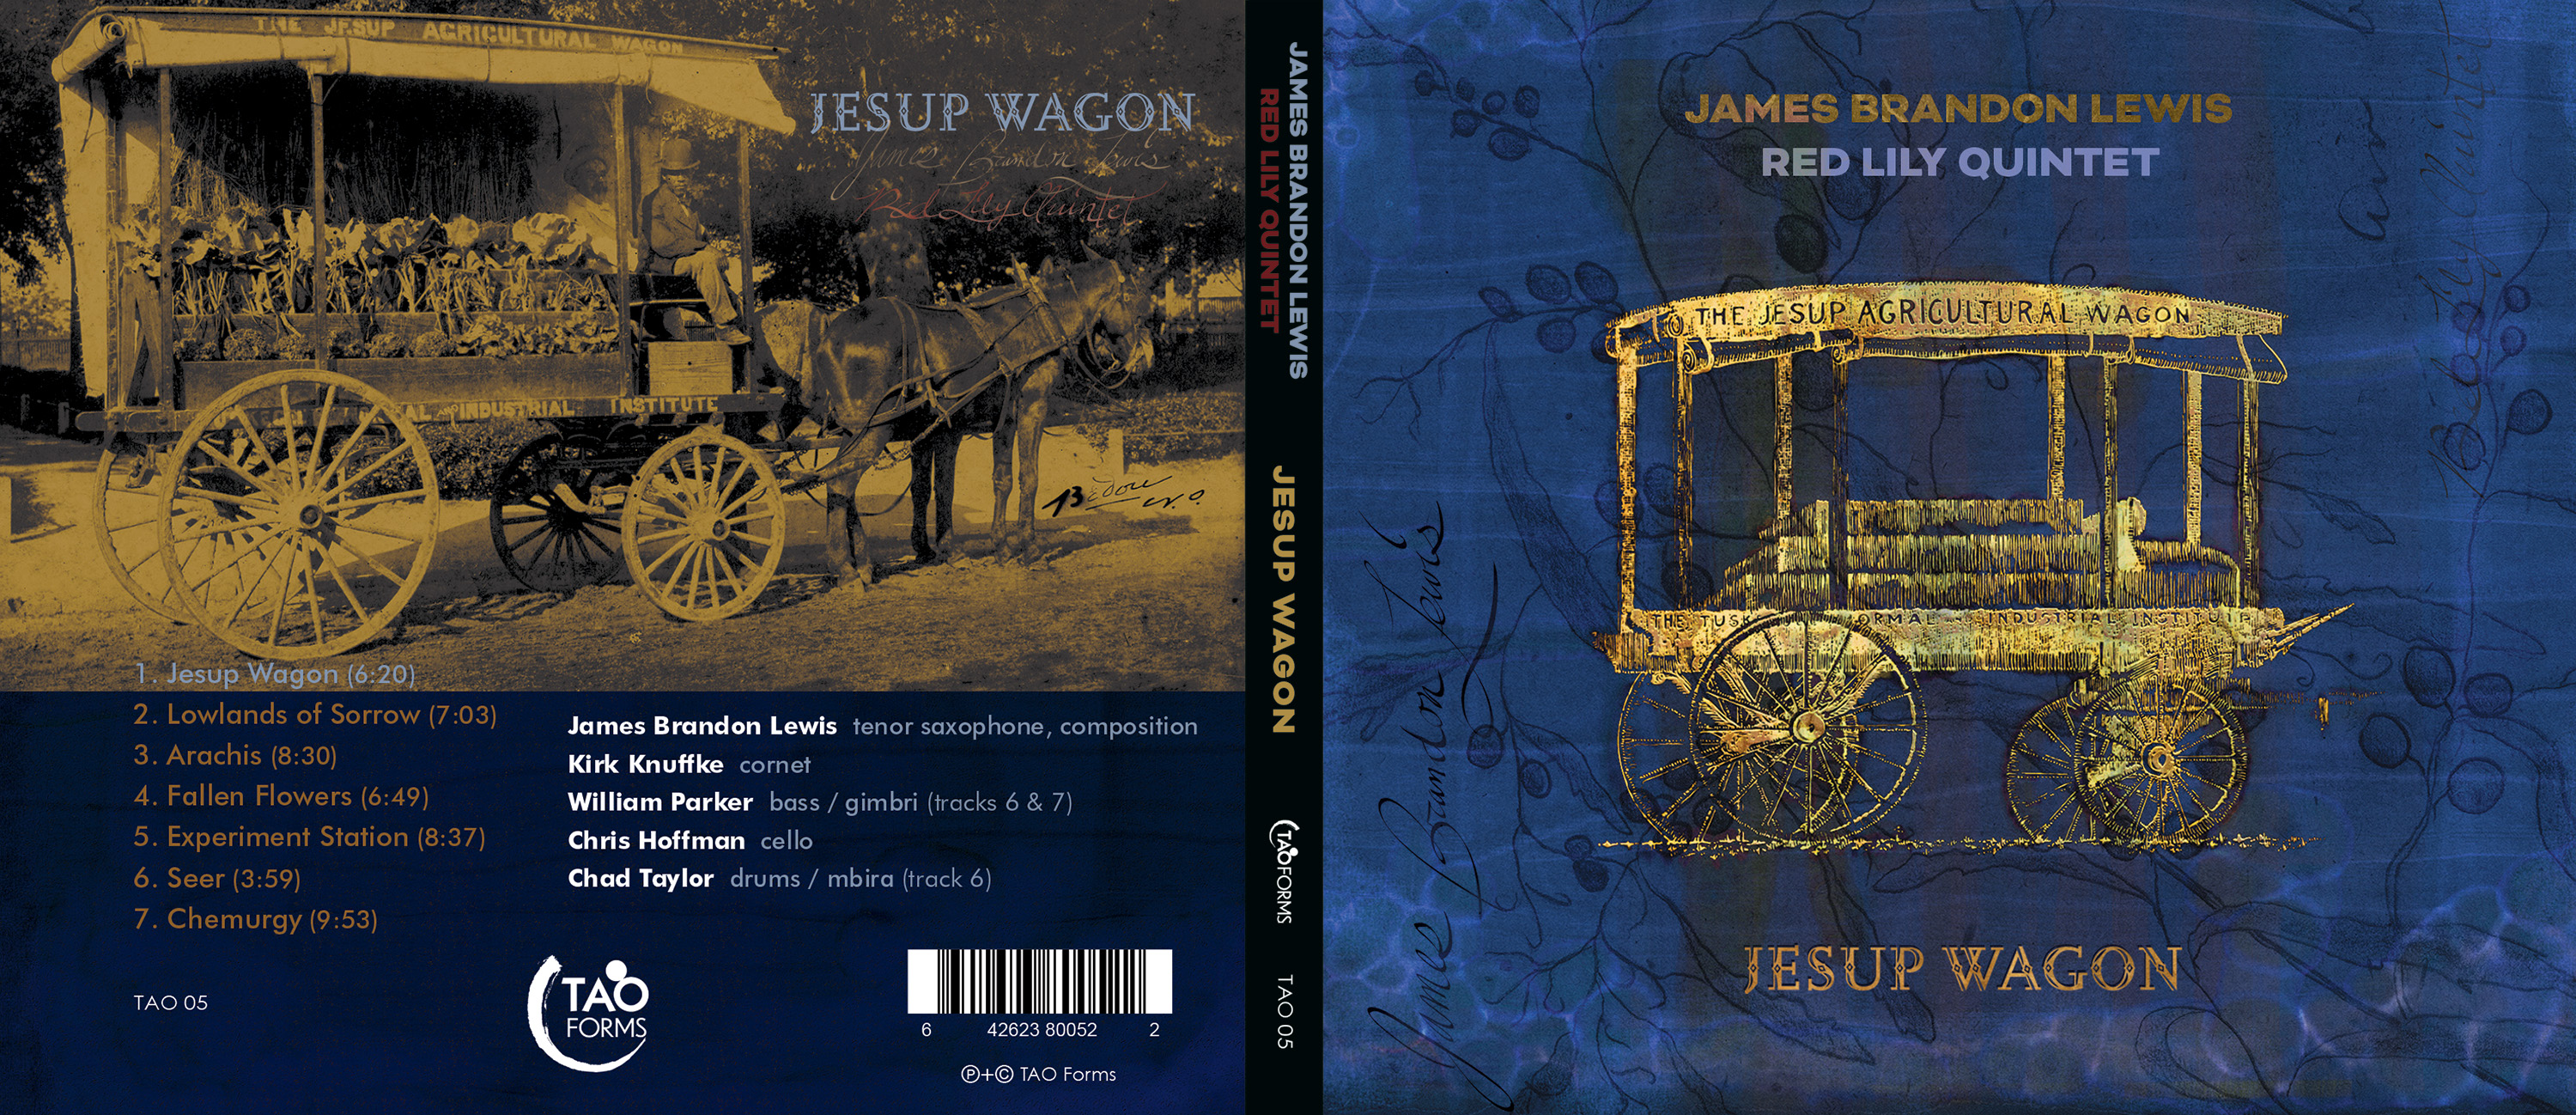 front and back cover of cd for Jesup Wagon by James Brandon Lewis Red Lily Quintet